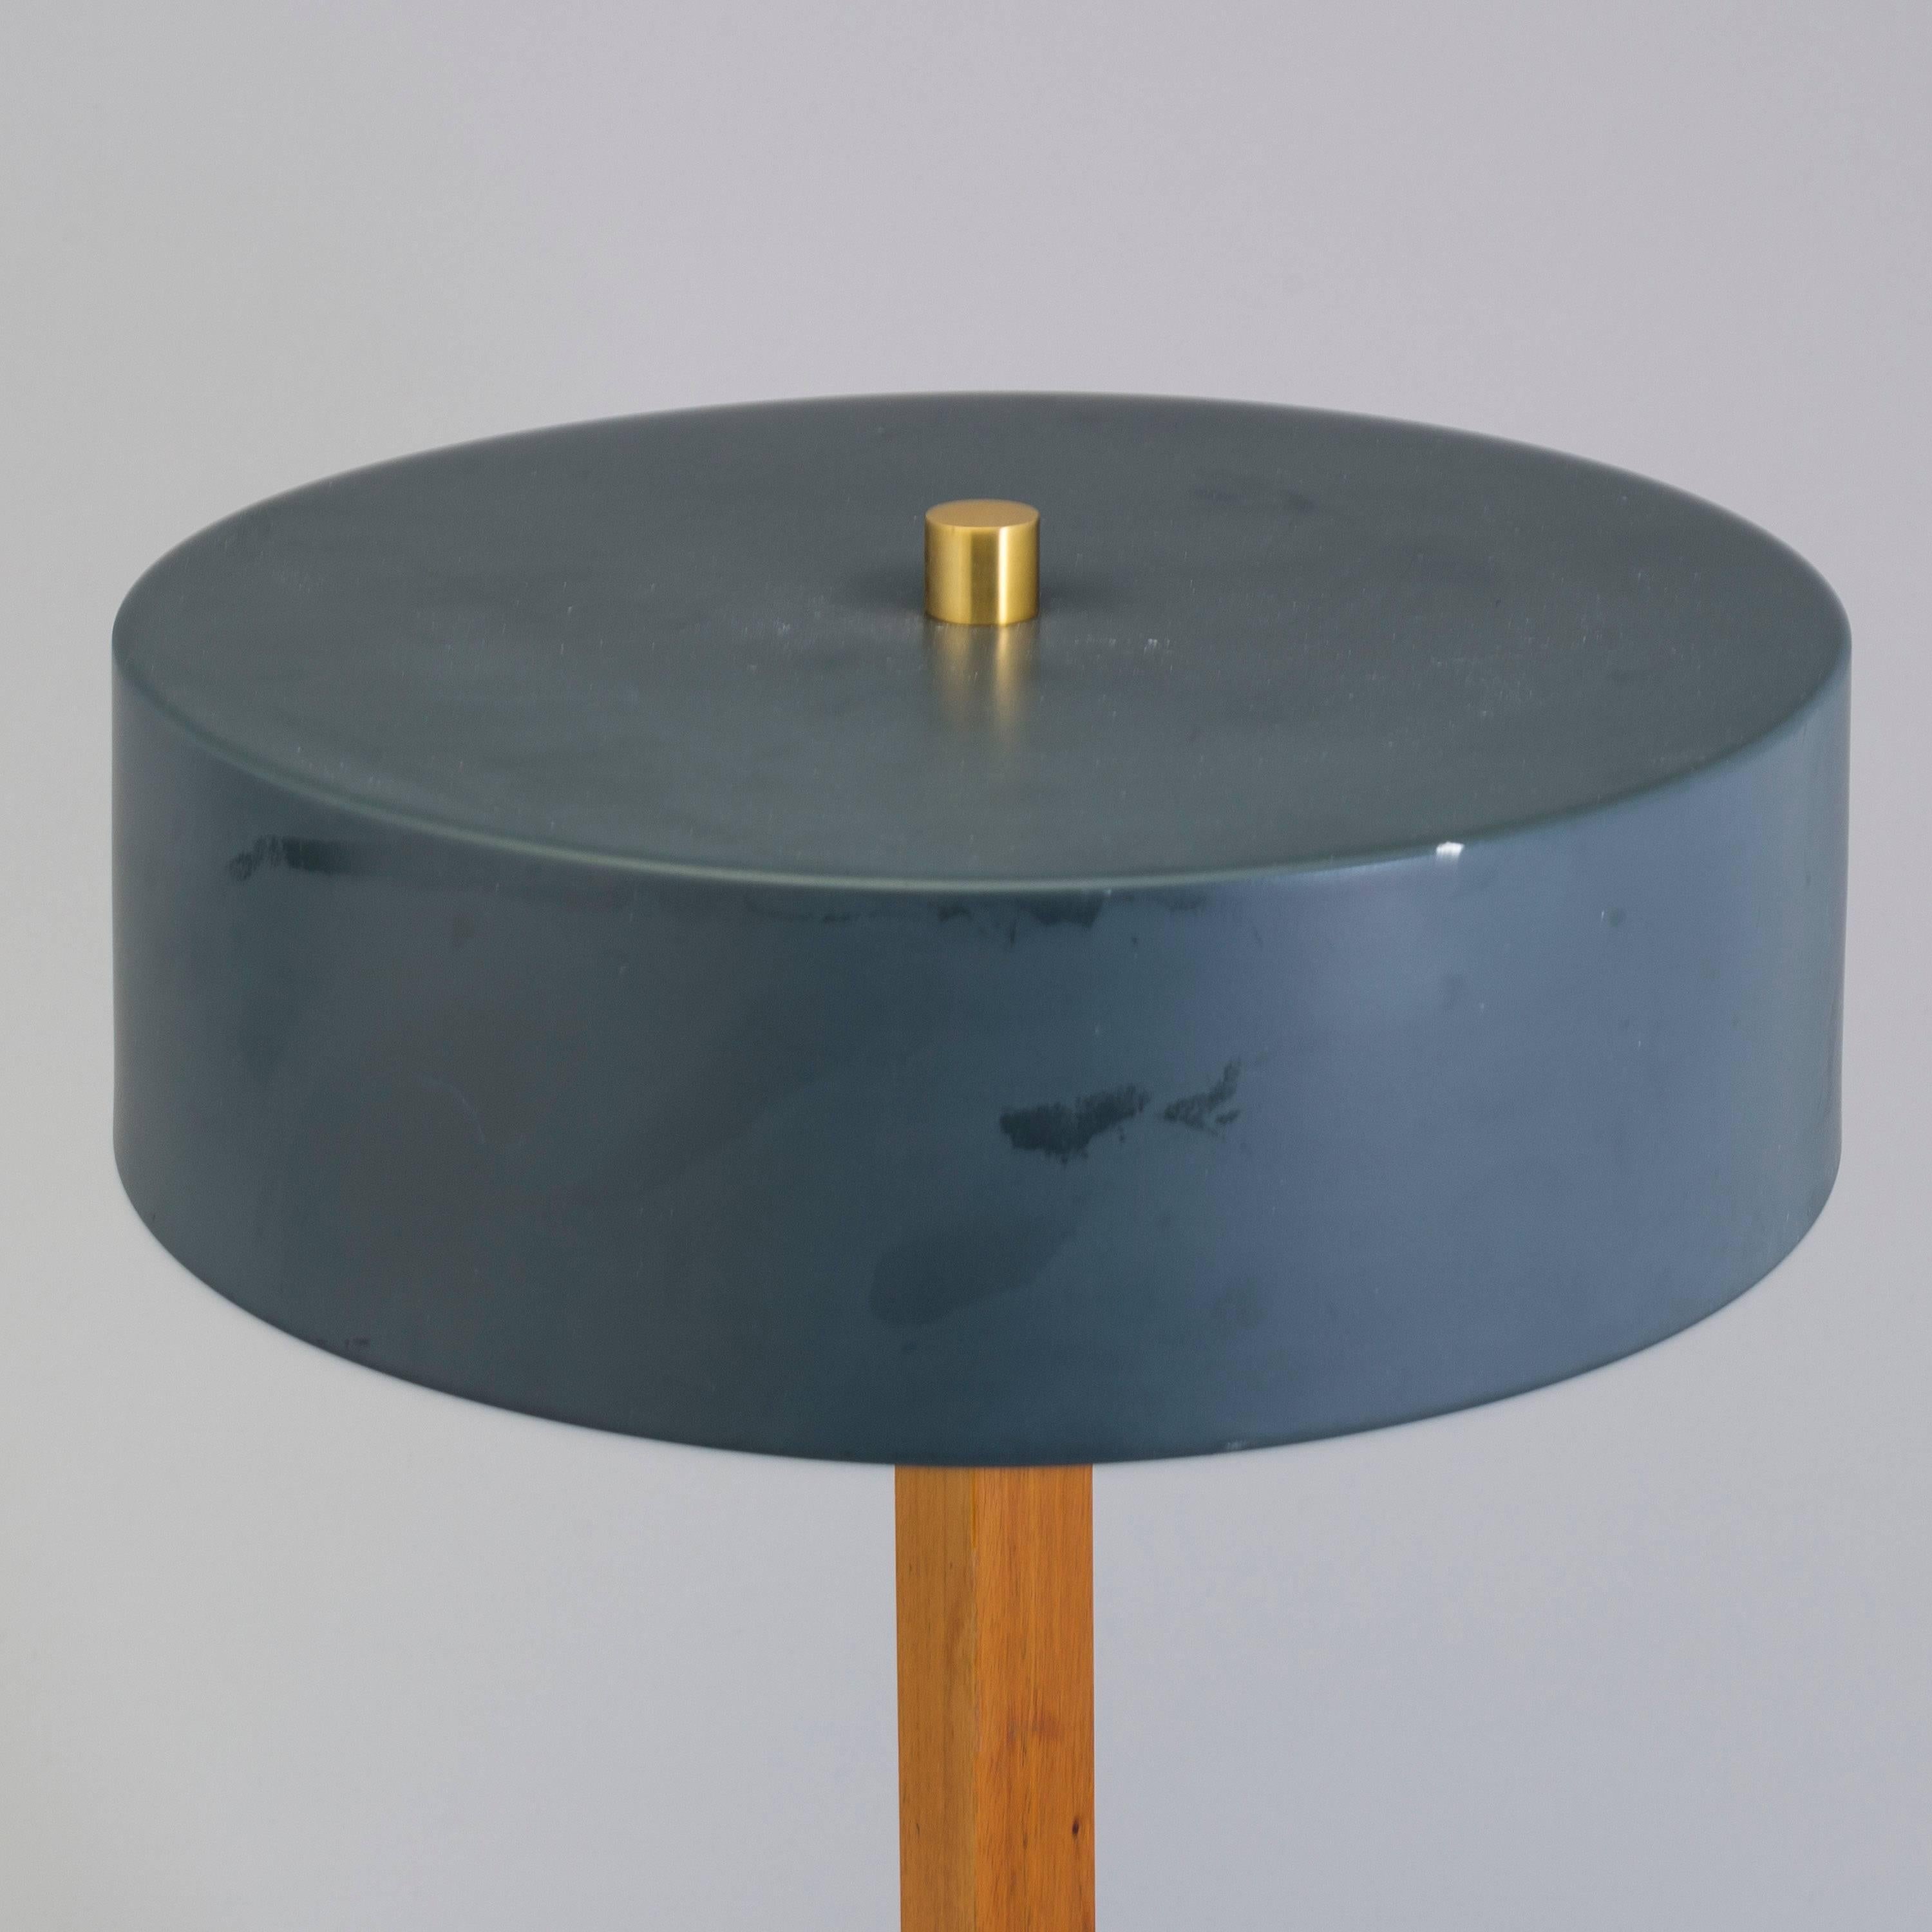 Brass construction with aluminum shade blue painted. Designed 1940s by Einar Backstrom.
2 pieces available